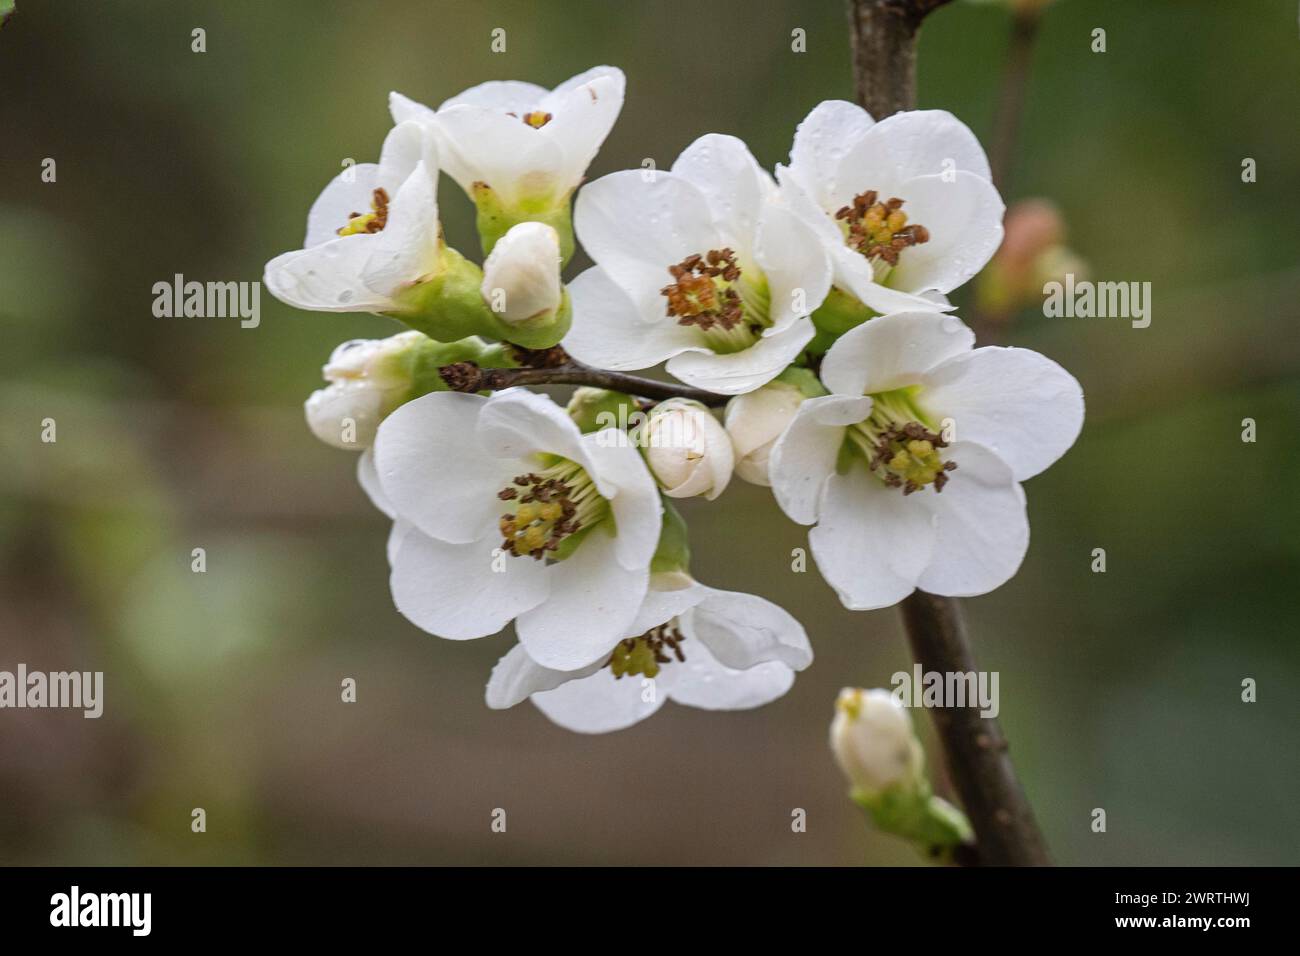 Japanese ornamental quince (Chaenomeles japonica), white form, Nordhorn Zoo, Lower Saxony, Germany Stock Photo